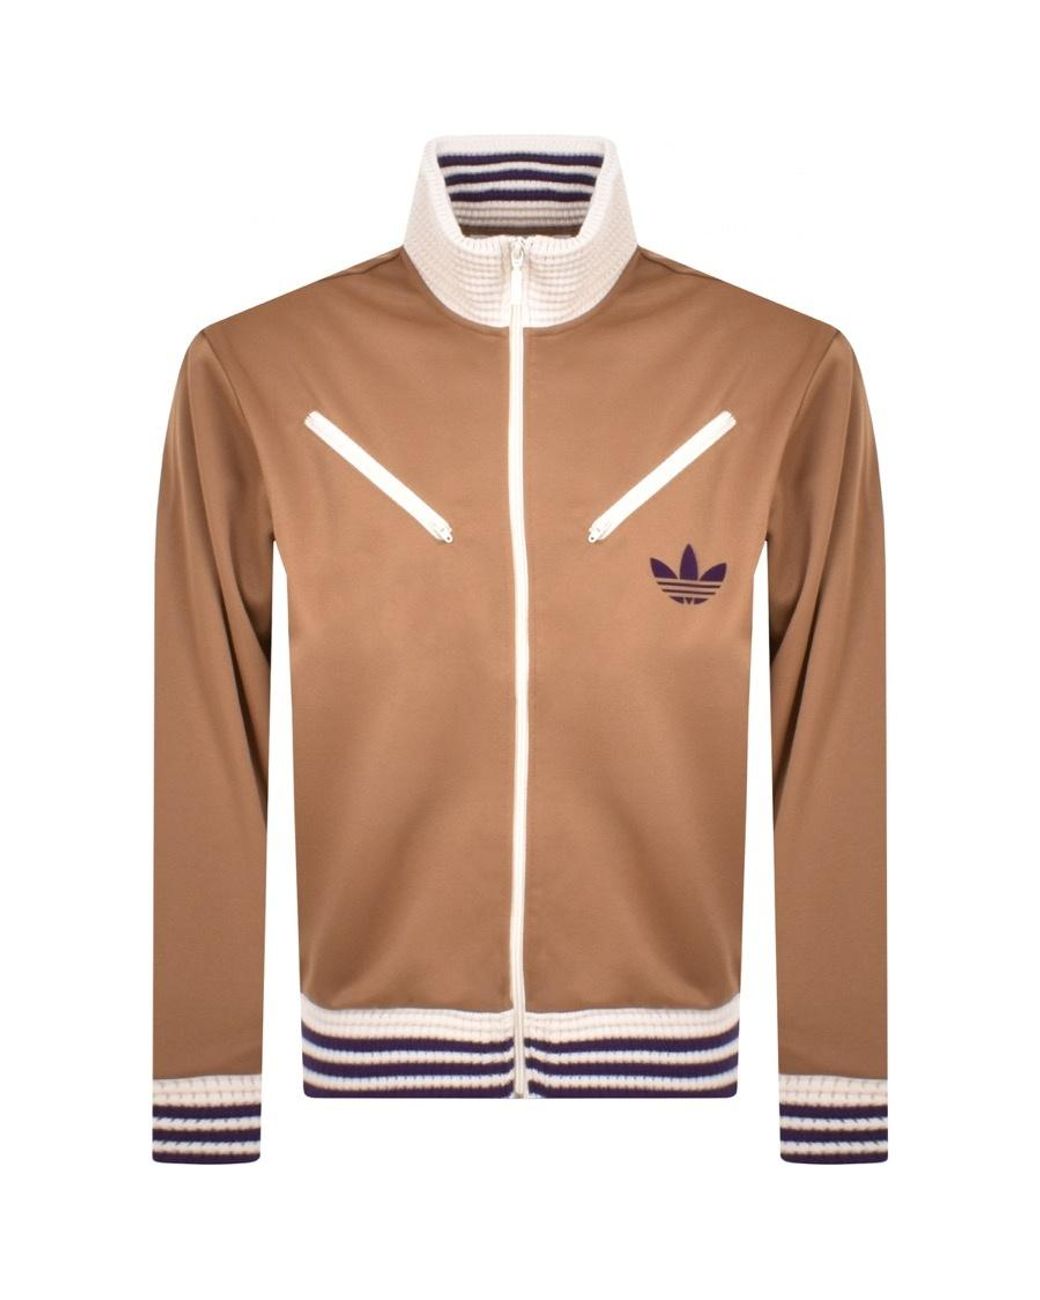 adidas Originals New Montreal 22 Track Top in Brown for Men | Lyst